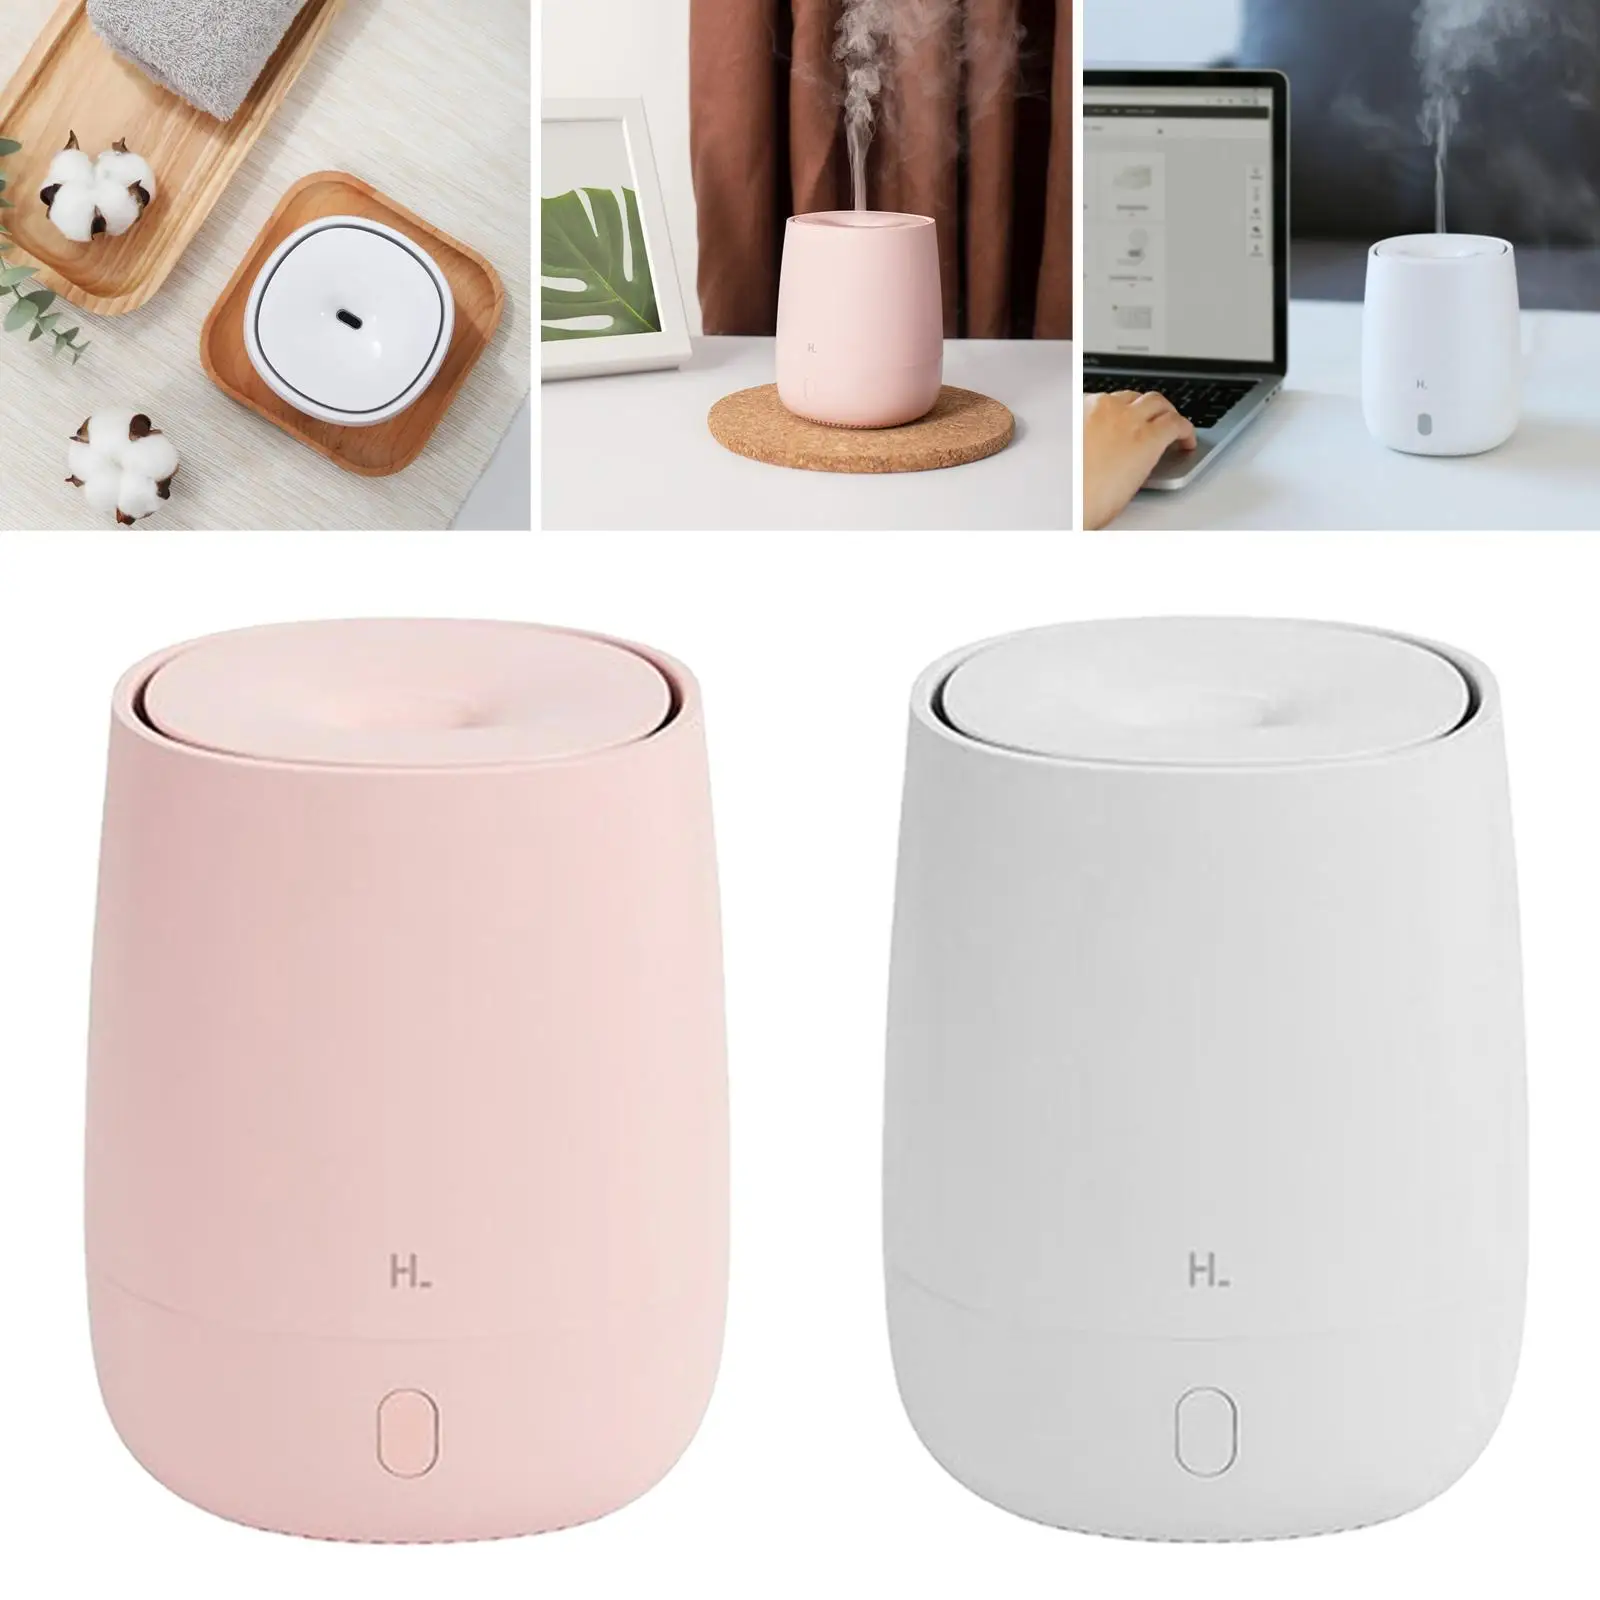 Electric Mini Ultrasonic Aroma Diffuser USB Essential Oil Diffuser LED Safety Night Light Scent for Desktop Bedroom Home SPA Car